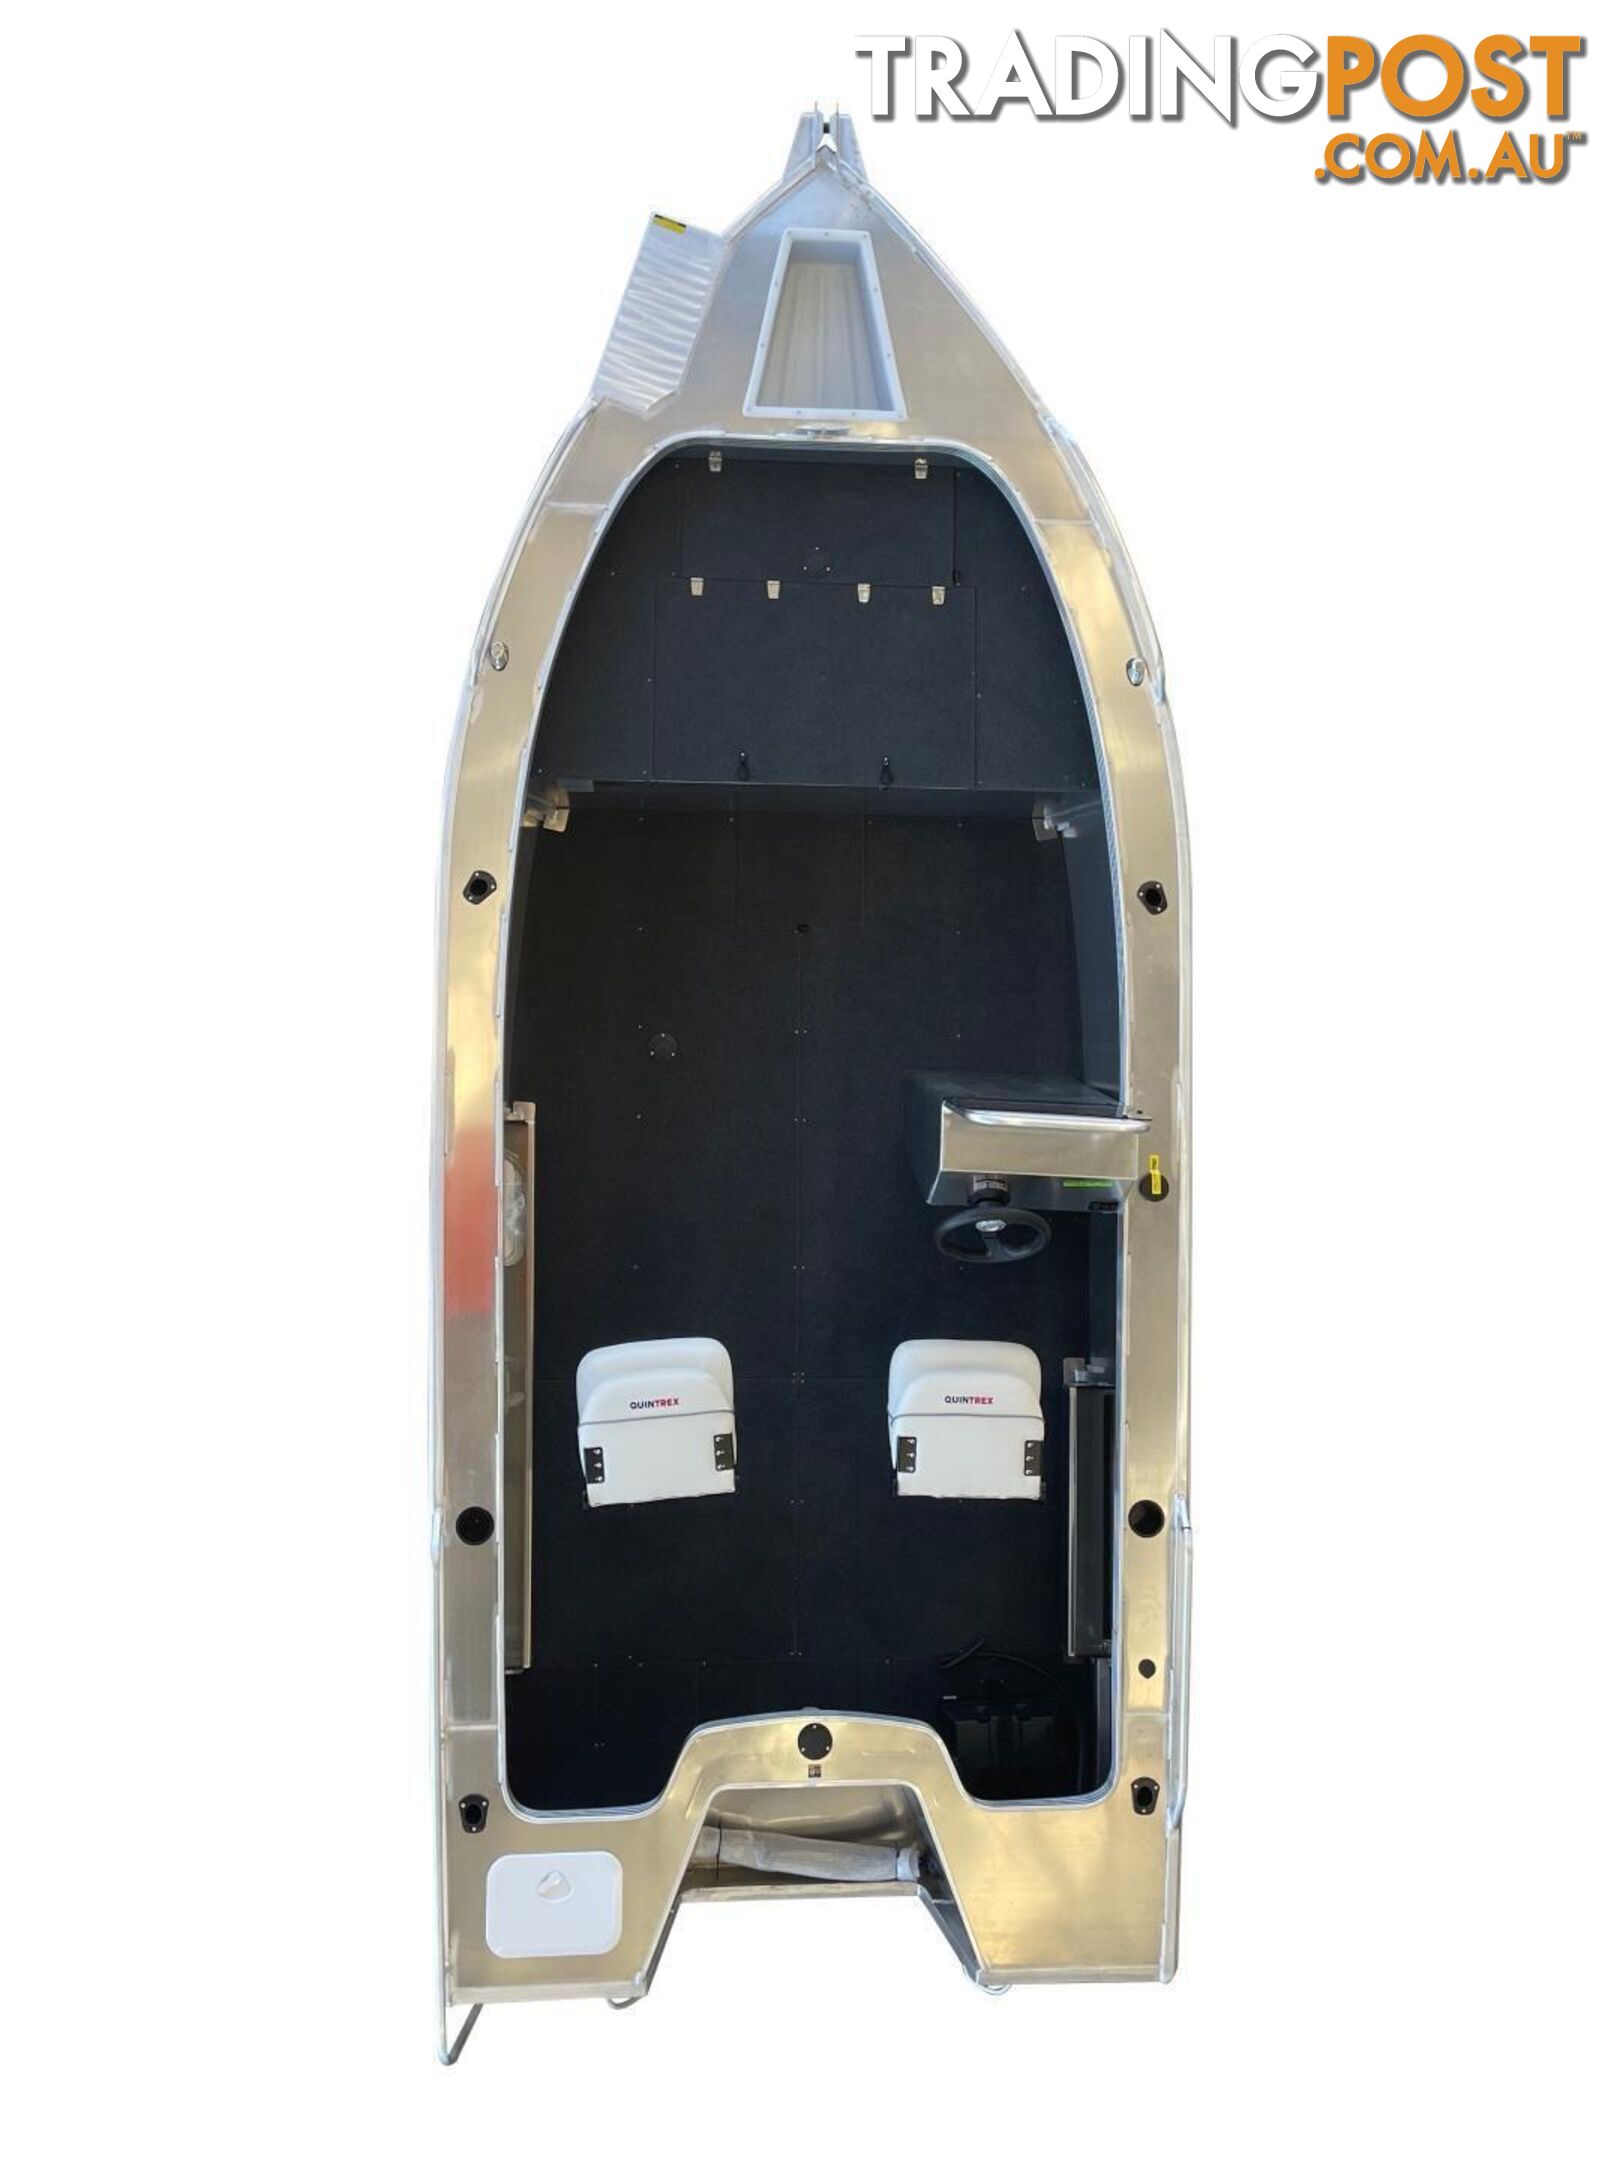 Quintrex 530 Renegade SC(Side Console) + Yamaha F90hp 4-Stroke - Pack 1 for sale online prices